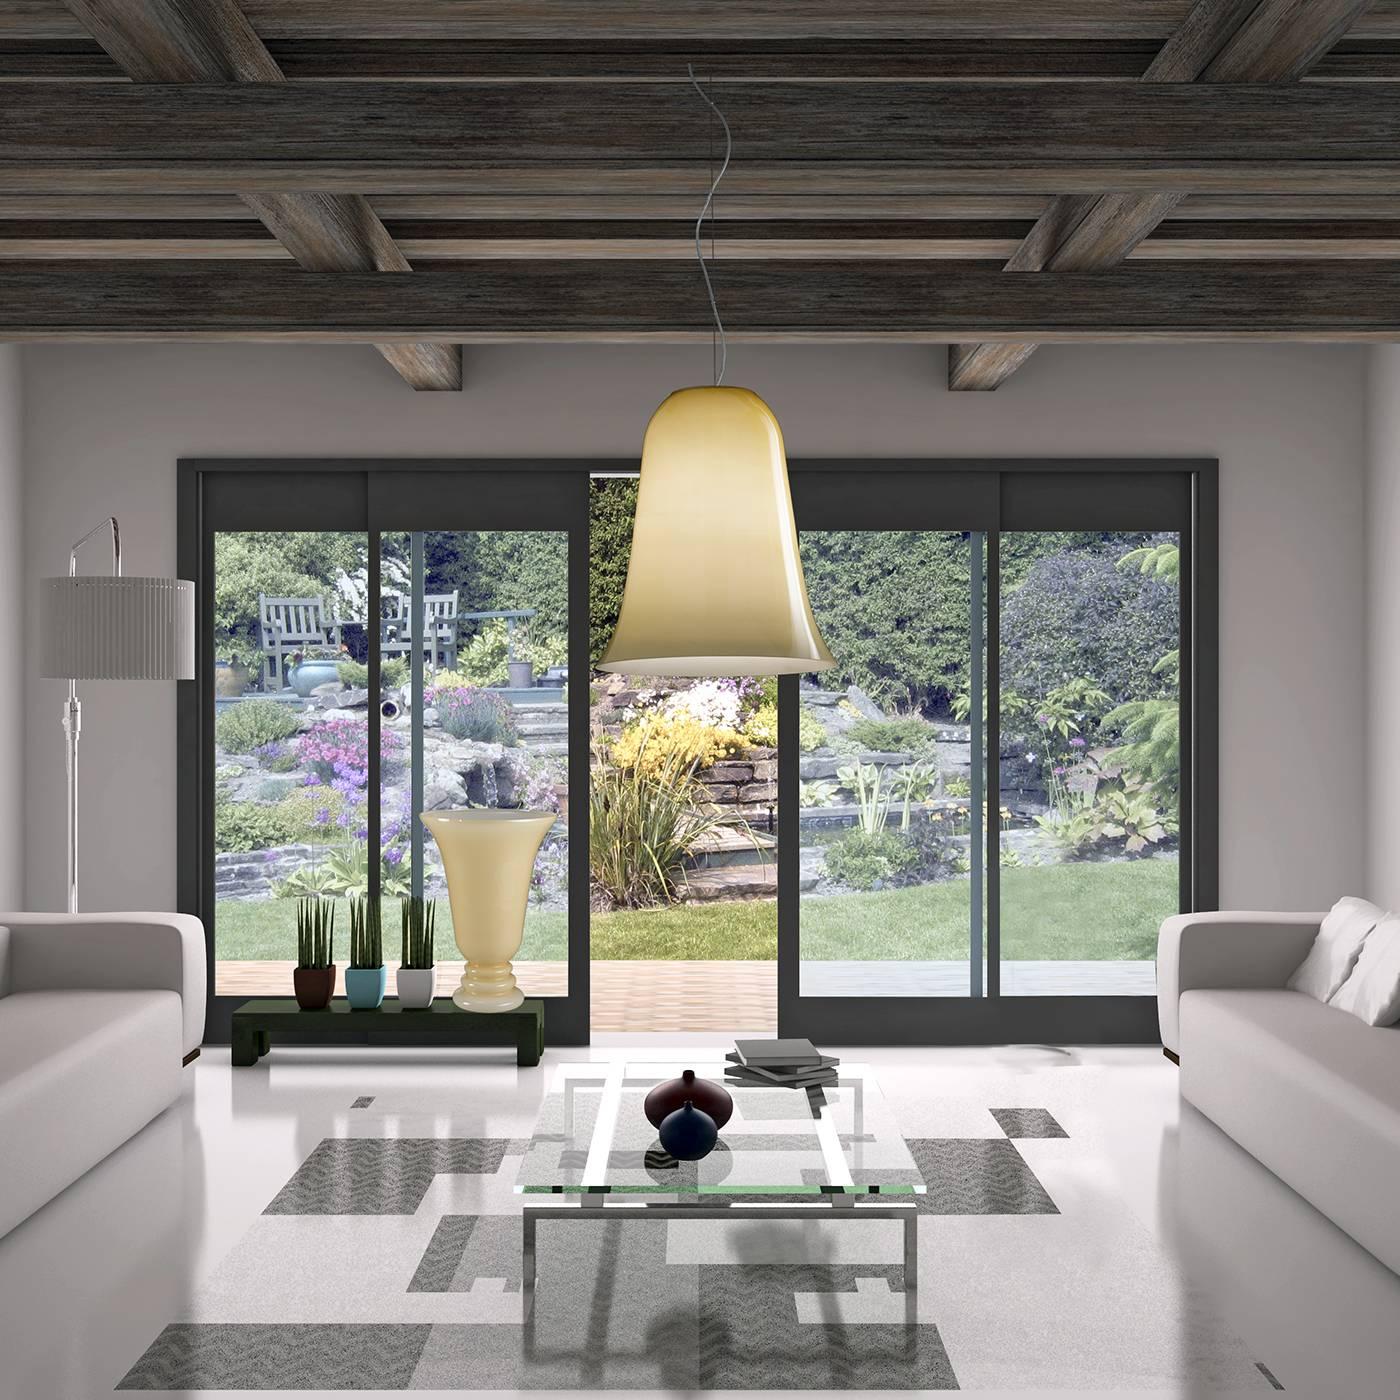 This superb ceiling lamp is modern and Minimalist, while also boasting the exquisite traditional craftsmanship of the Murano glass-making masters. The shade has a delicate amber hue and its elongated bell-like Silhouette is obtained by blowing the